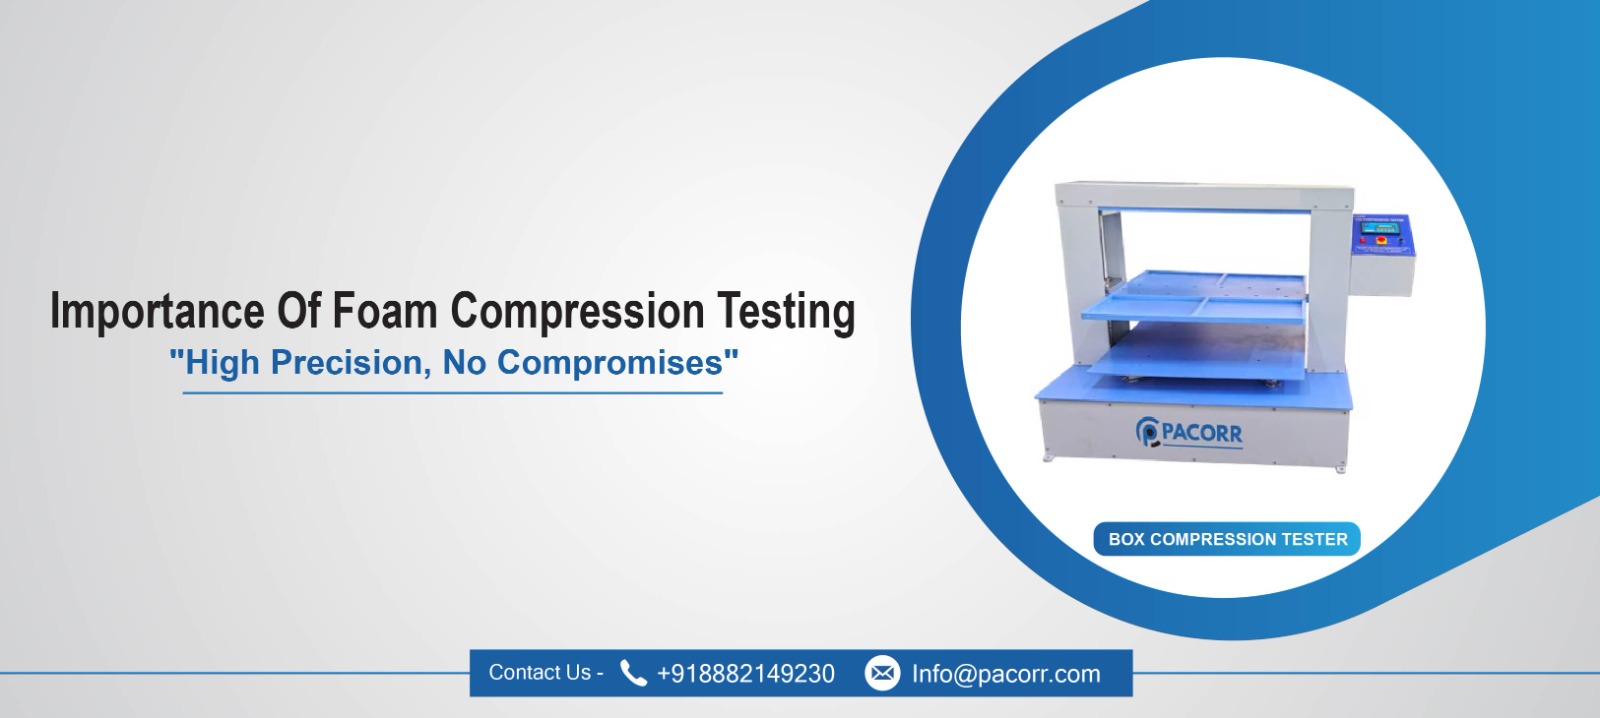 Importance of Foam Compression Testing